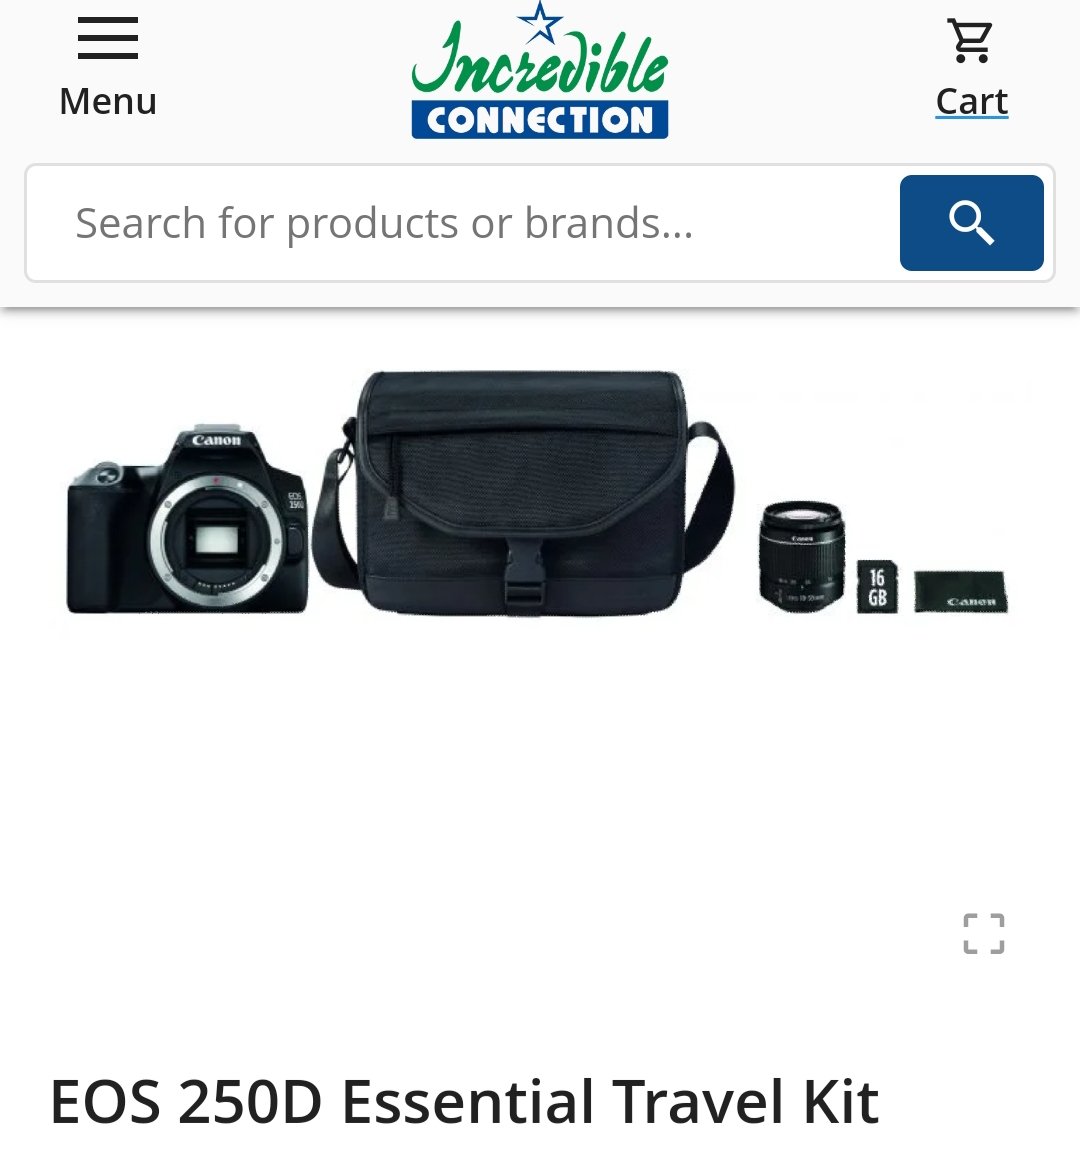 1. Canon EOS 250D = R8999  @IncConnectionLove this baby. It's great for the YouTuber doing sit down videos The 250D has a flip screen and eye detection auto focus... you won't have to worry about recording a video out of focus. #TechPlugWithYenzi